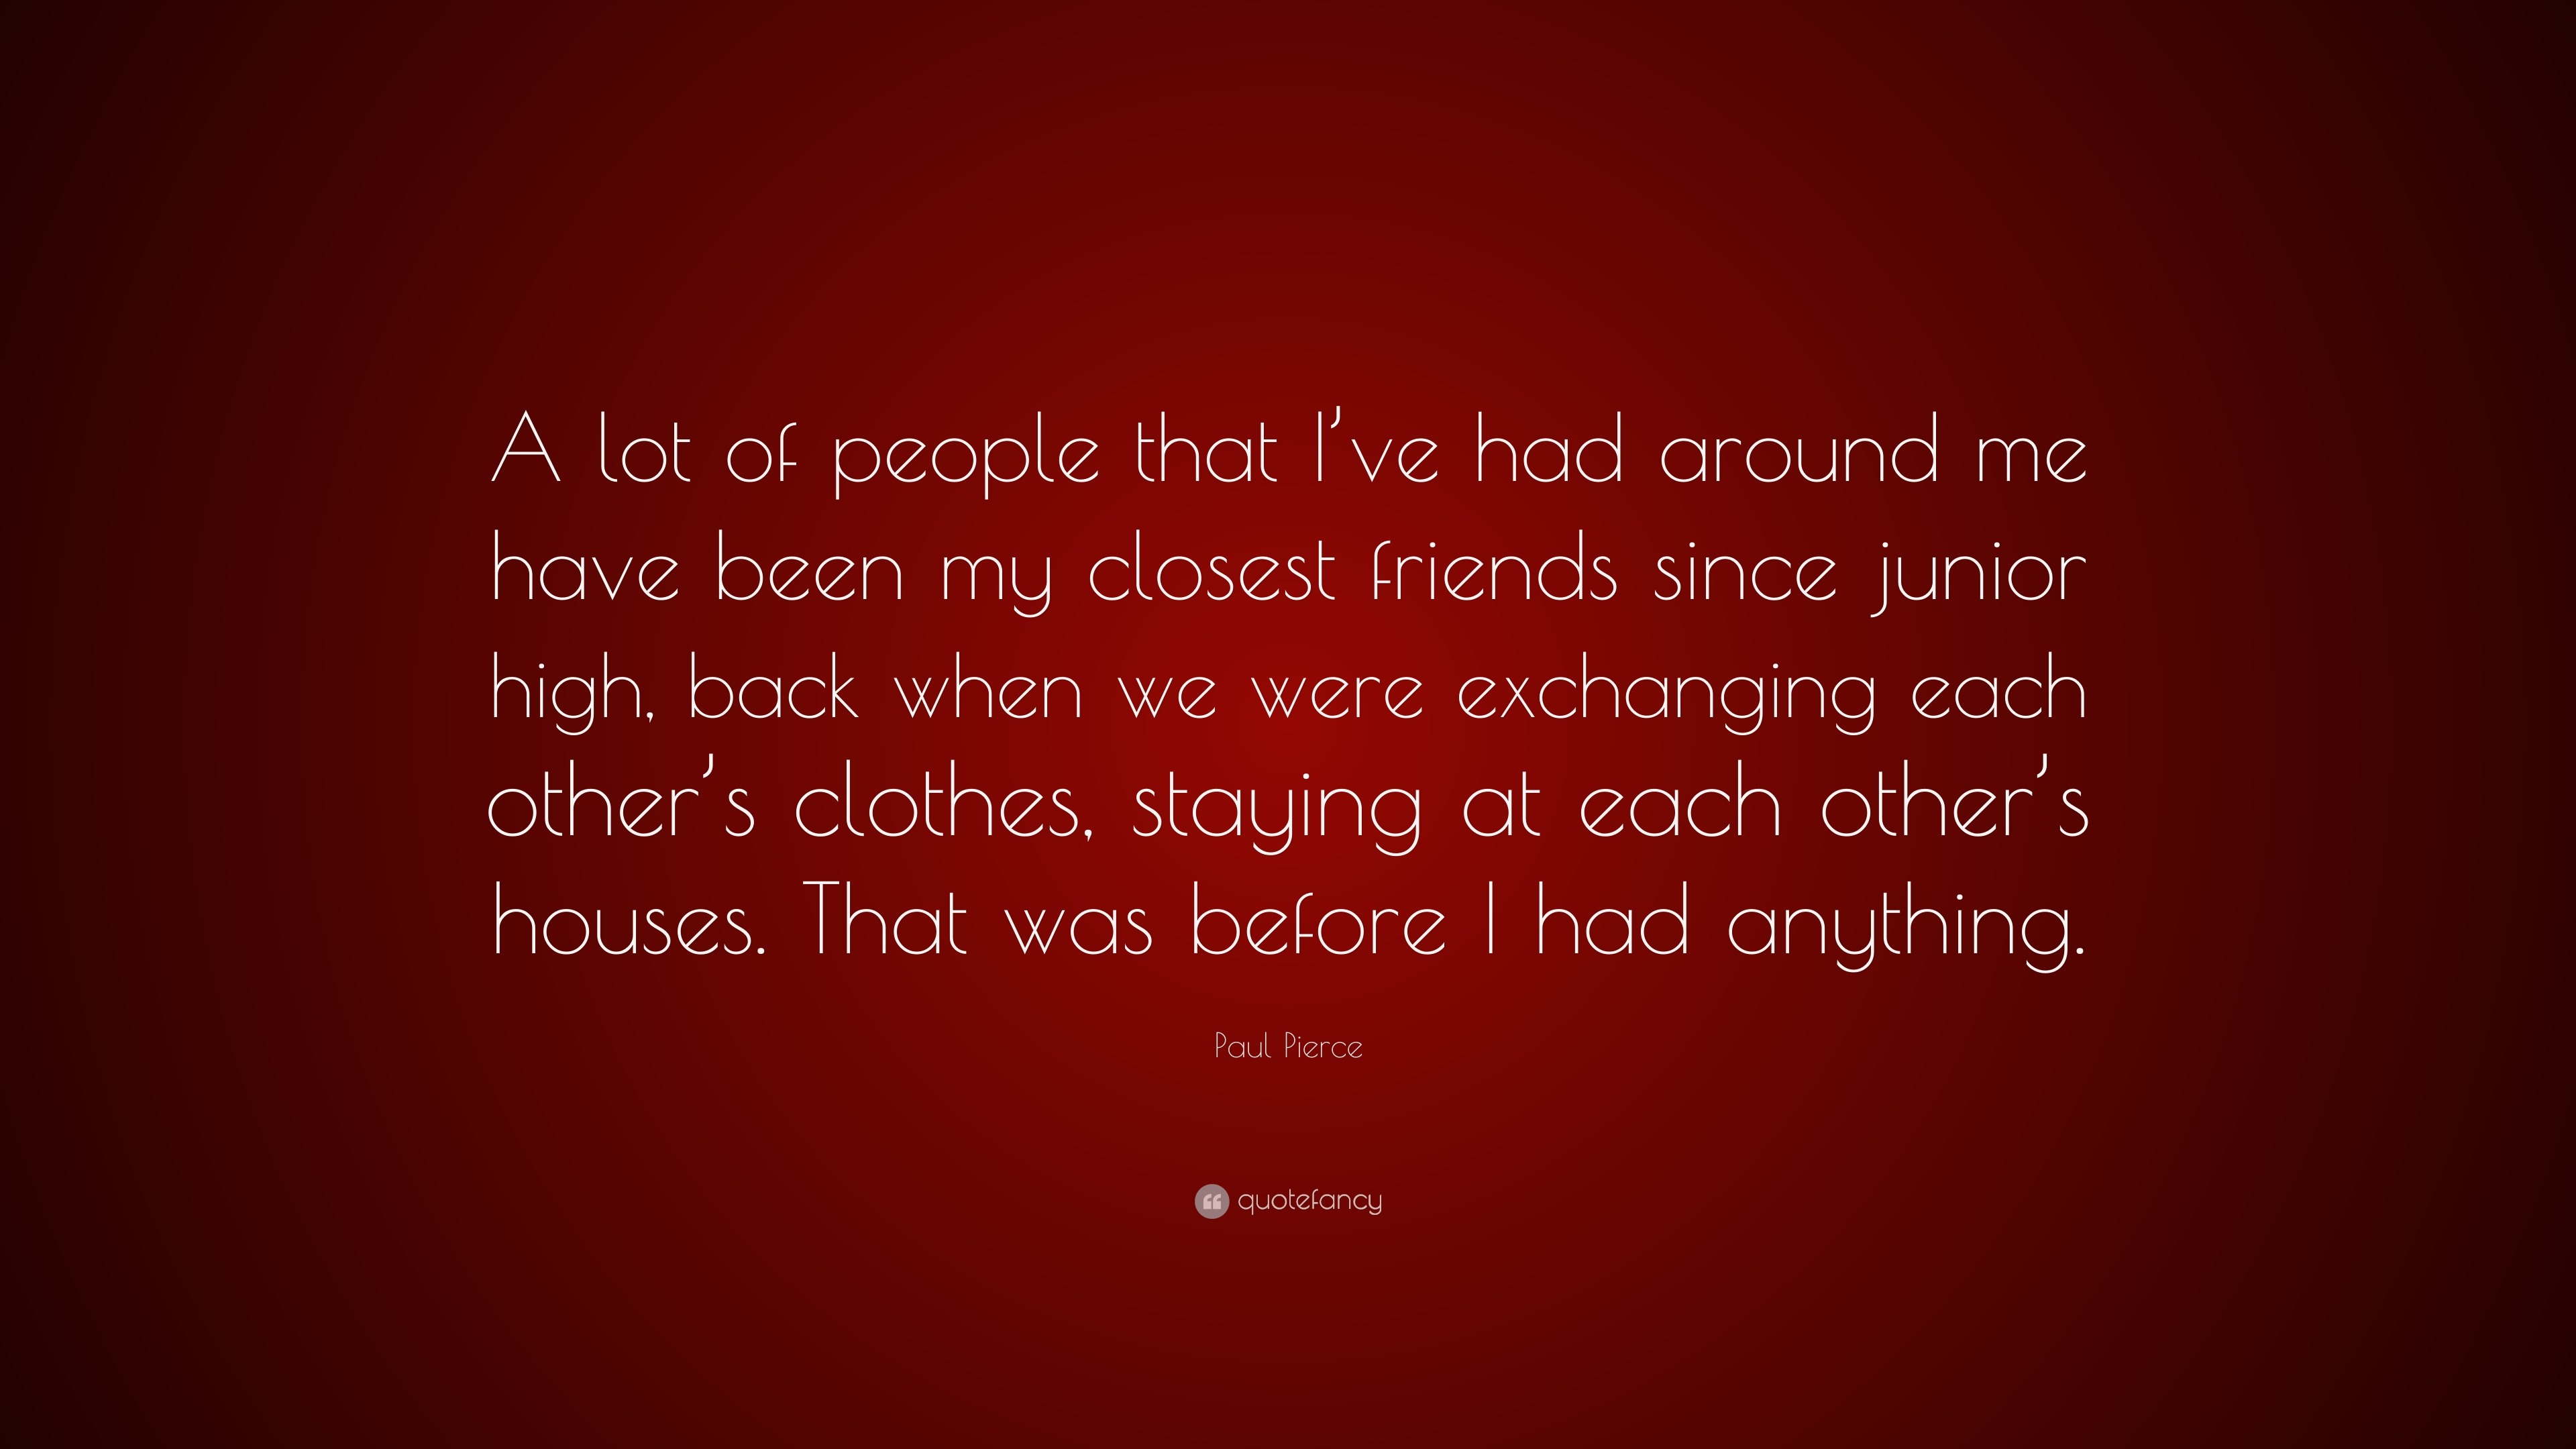 Paul Pierce Quote: "A lot of people that I've had around me have been my closest friends since ...